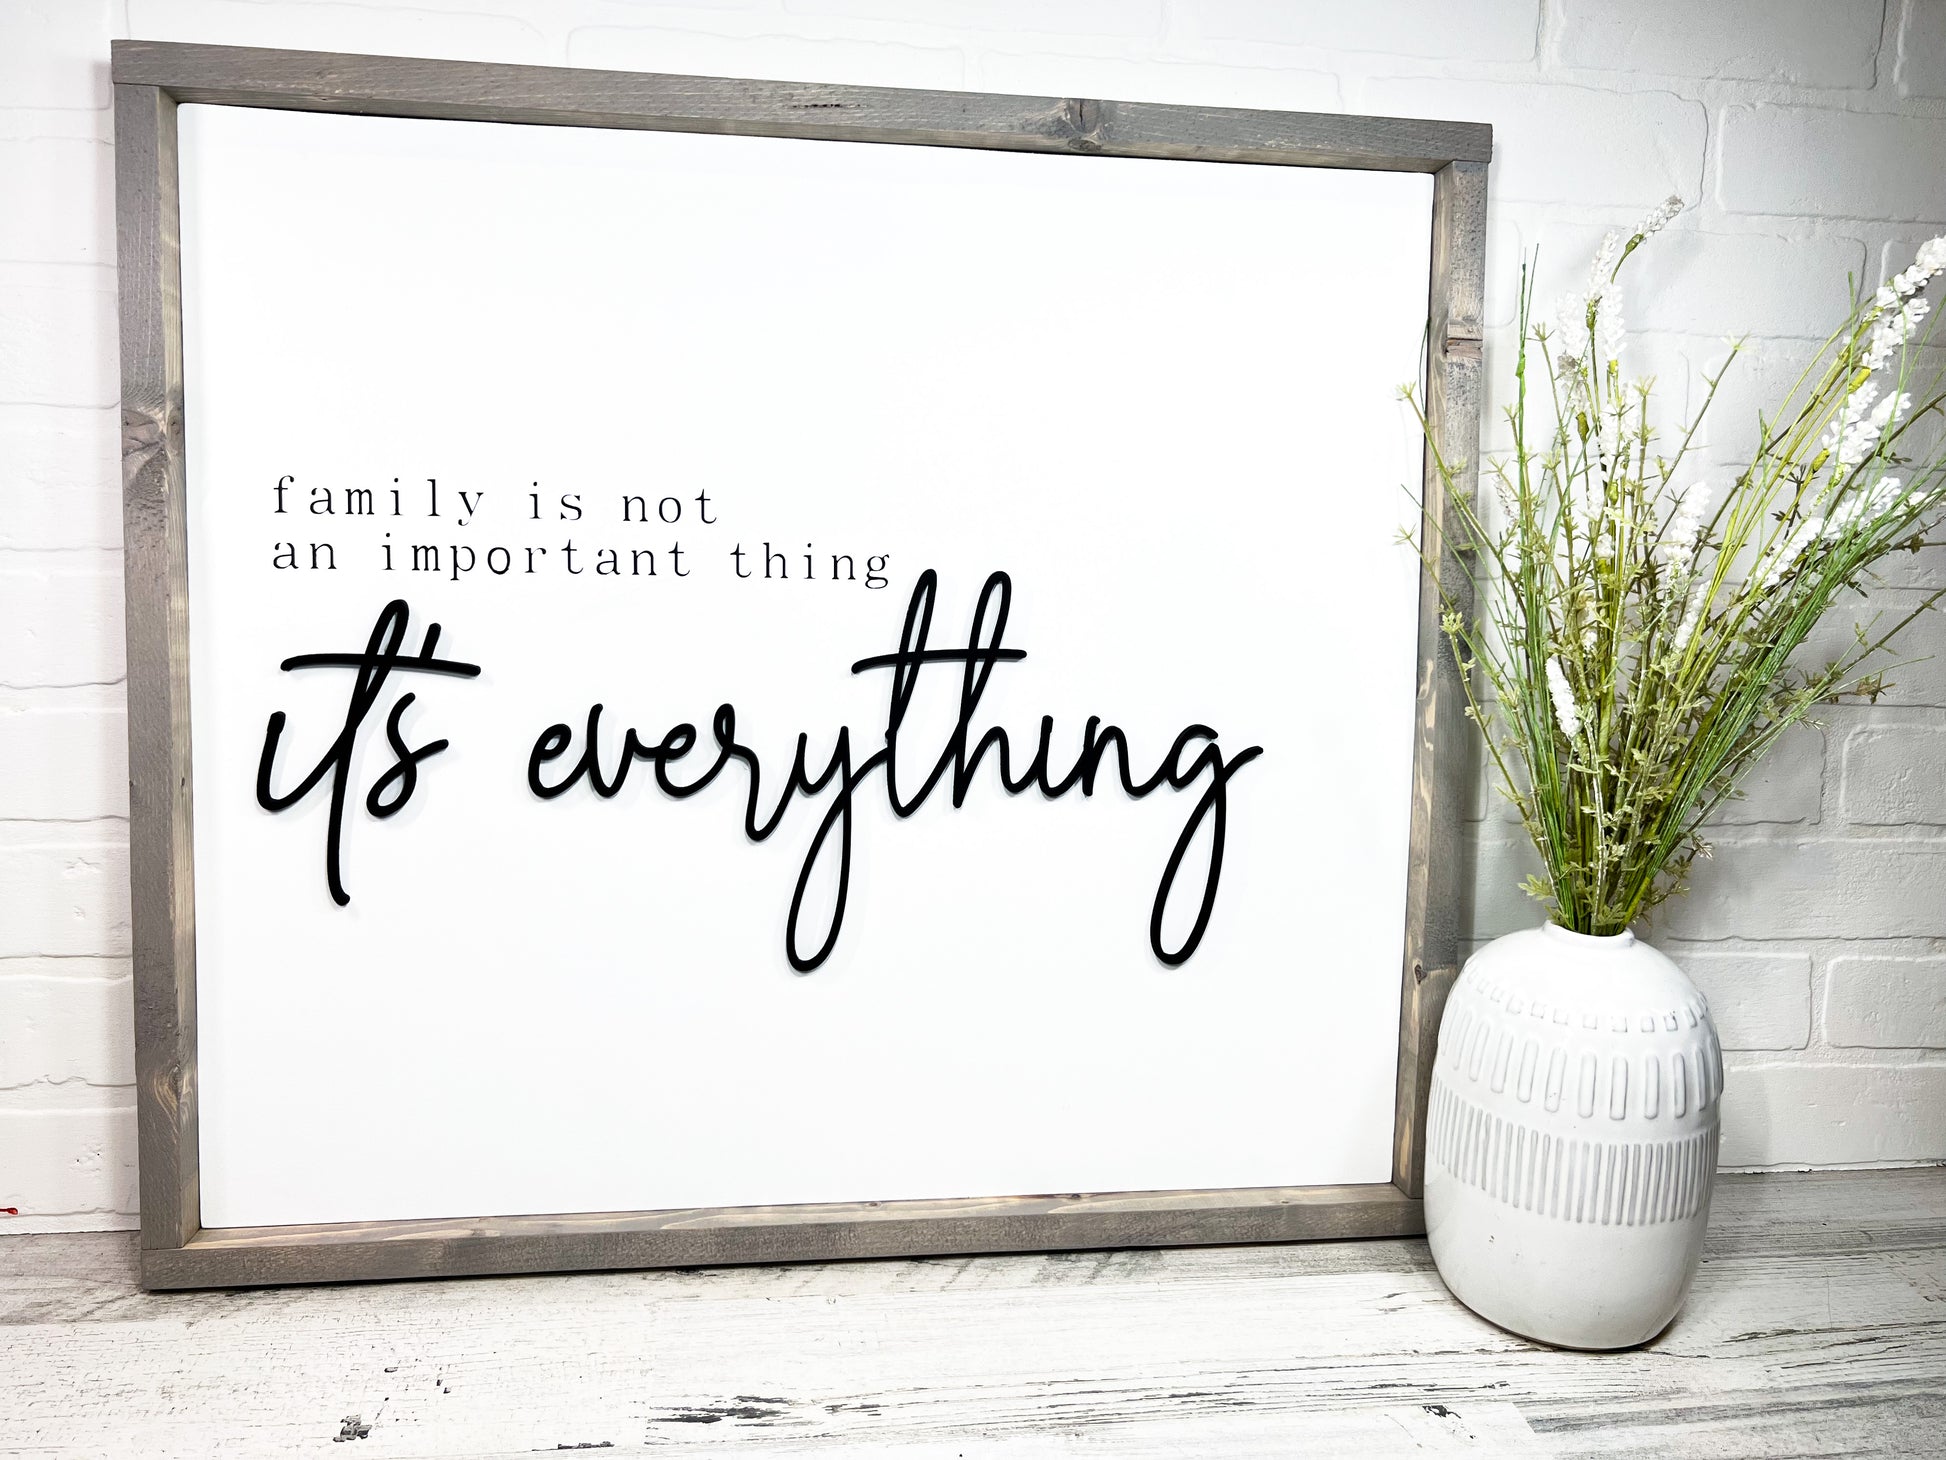 Family is Everything - B-Cozy Home Decor